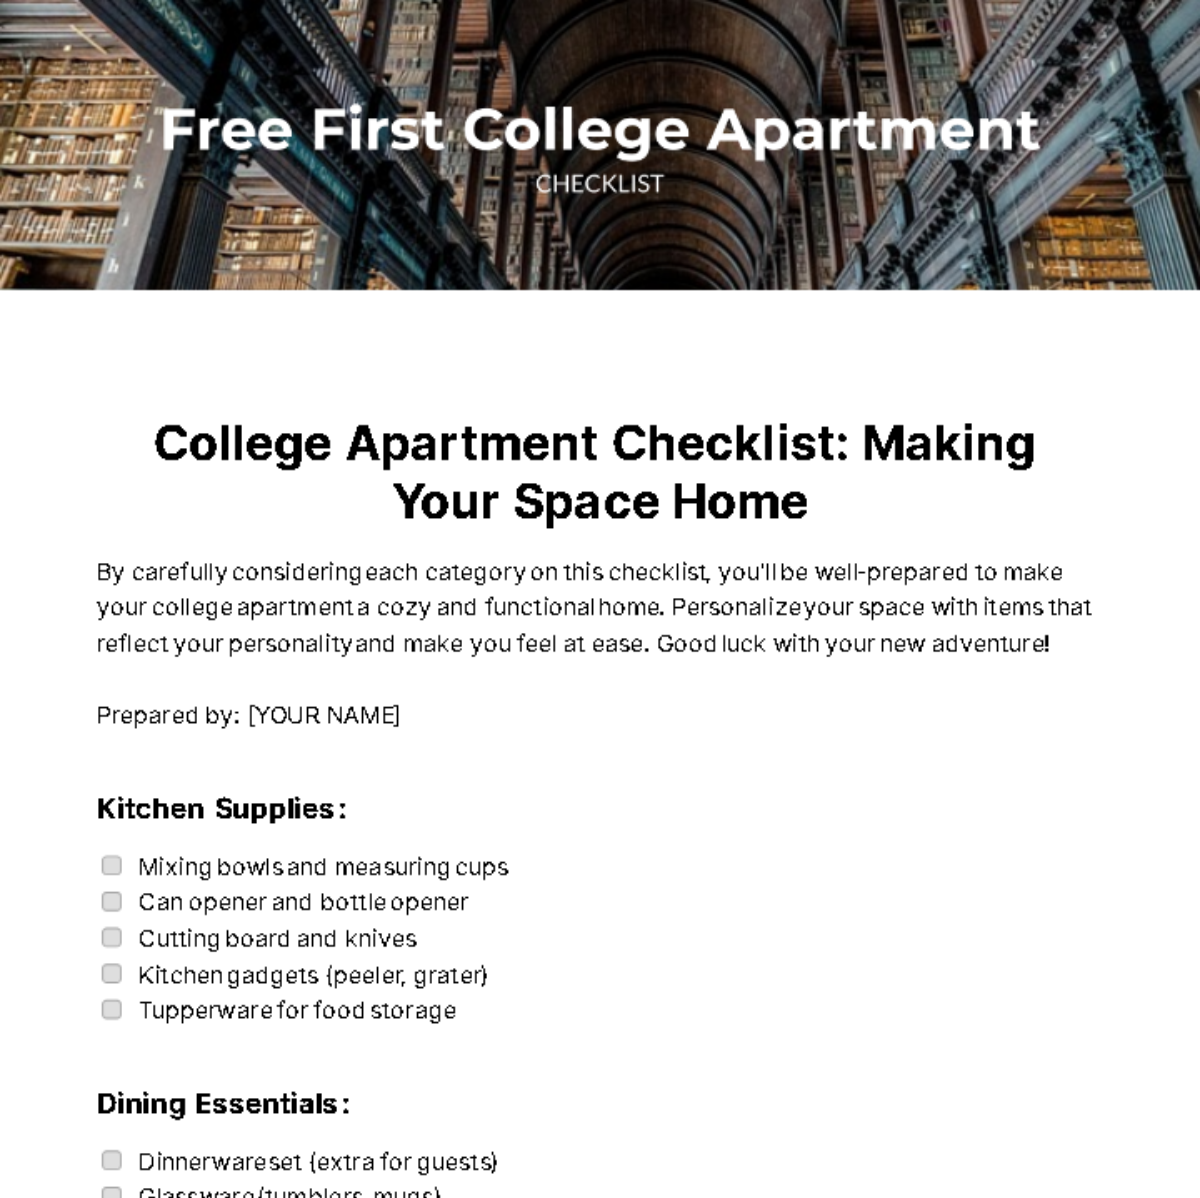 Free First College Apartment Checklist Template